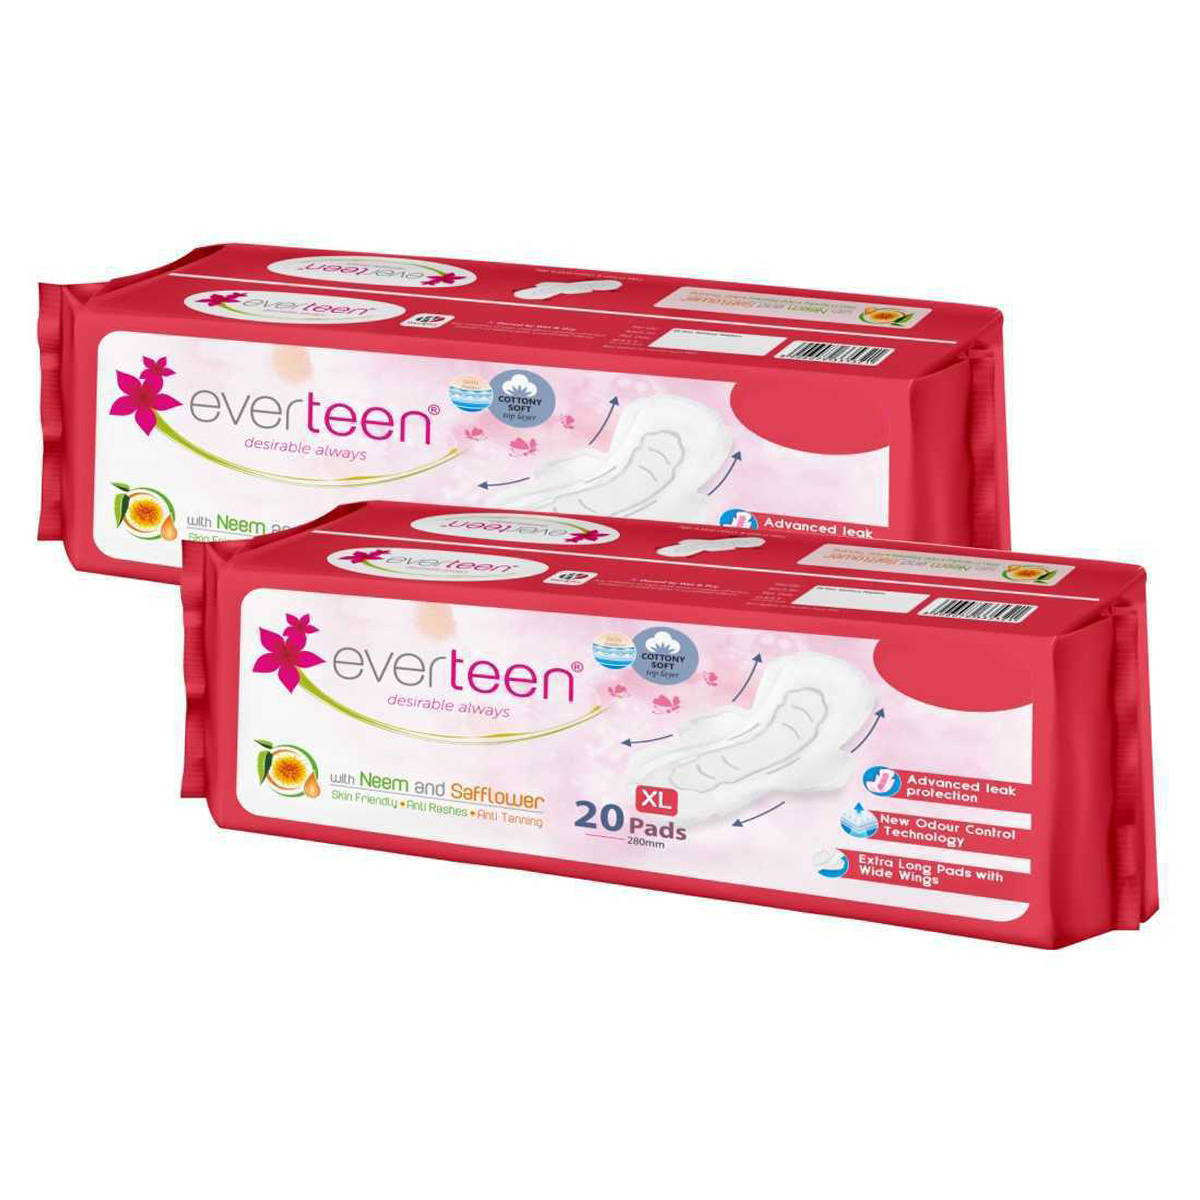 everteen Xl Sanitary Napkin Pads With Neem And Safflower, Cottony-soft Top Layer For Women, 20 Pads-Pack of 2